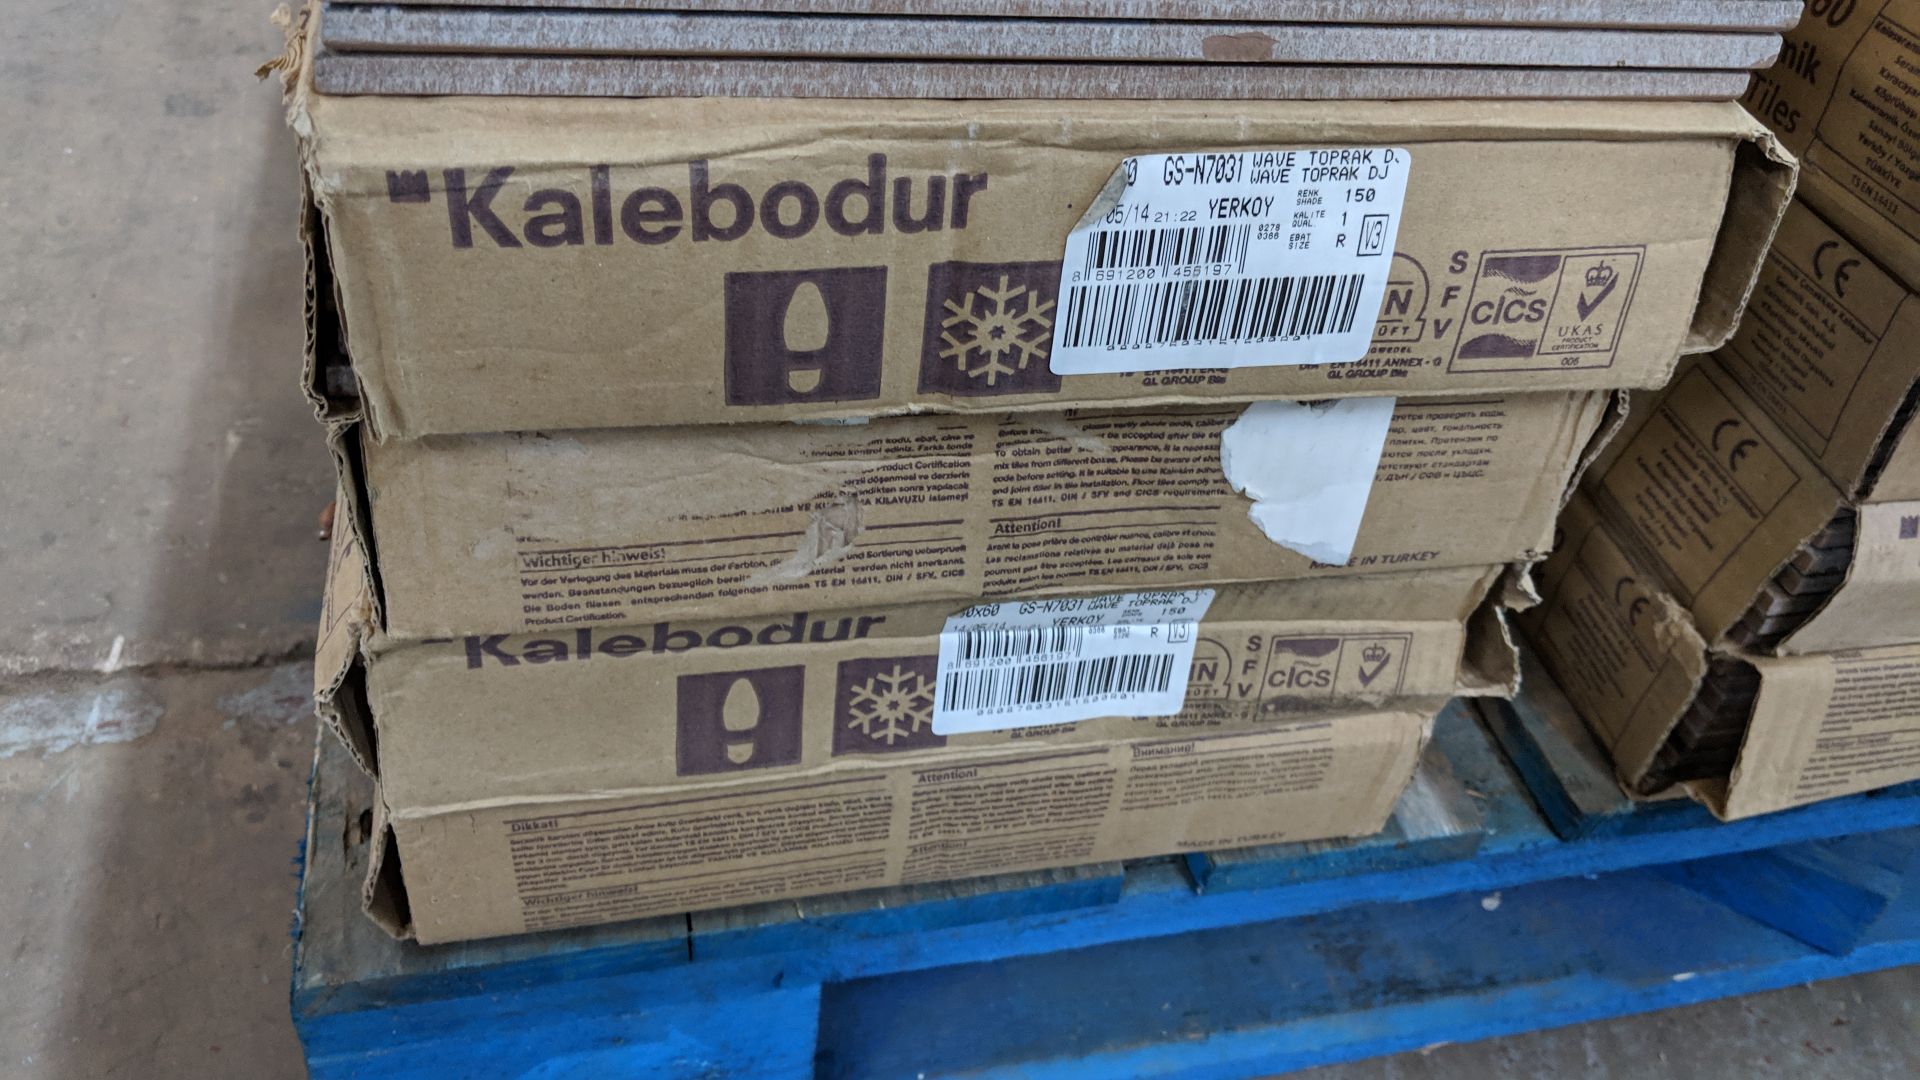 Approx. 11 boxes of Kalebodur high quality floor/wall tiles, each box containing approx. 1.26sq m of - Image 4 of 6